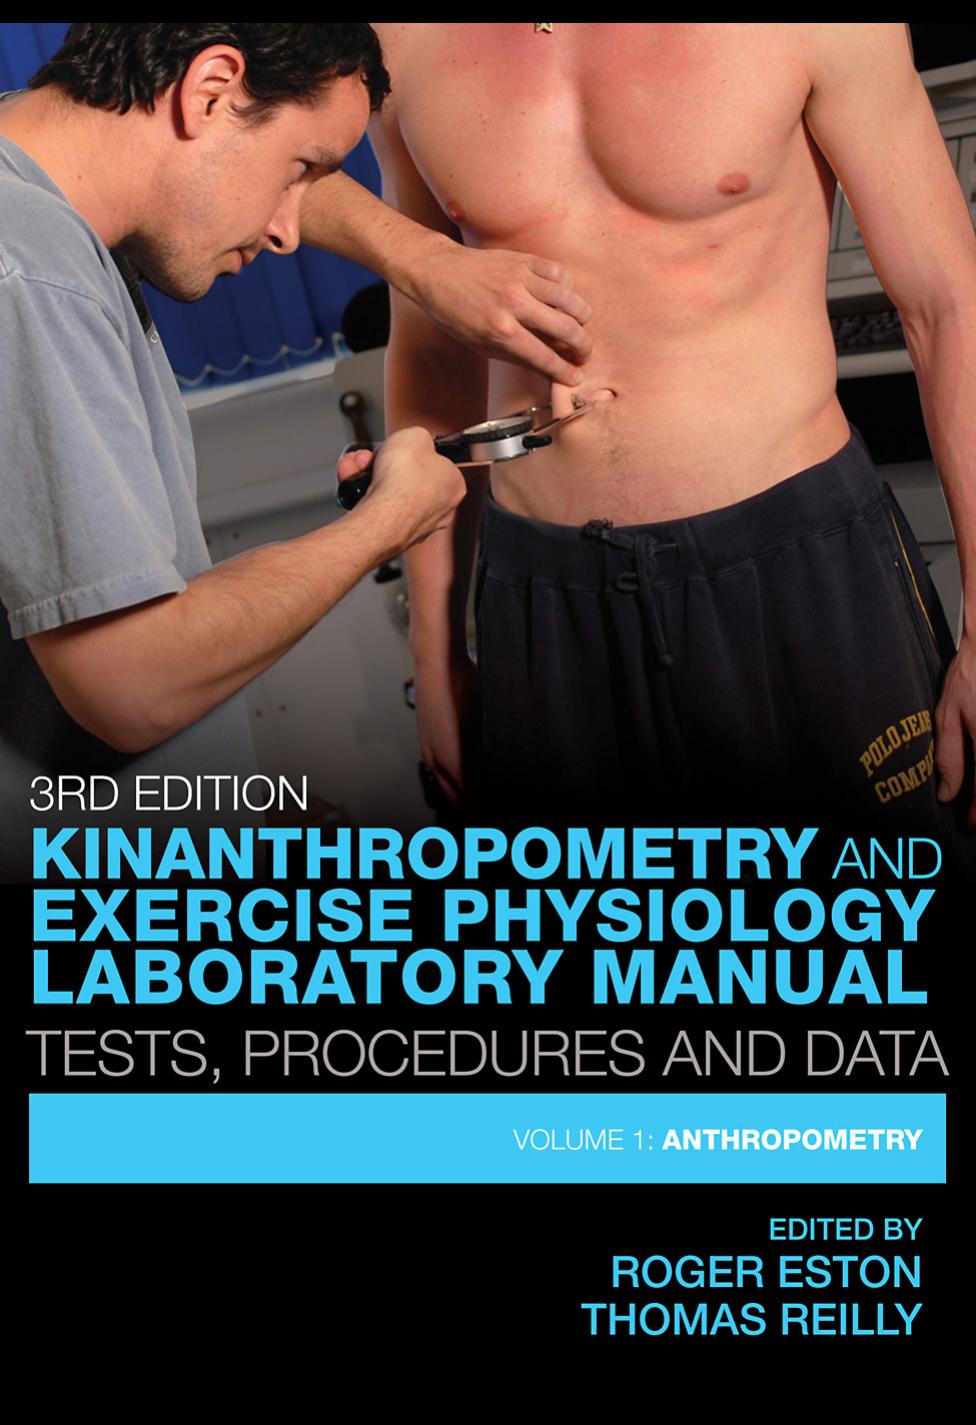 Kinanthropometry and Exercise Physiology Laboratory Manual: Tests, Procedures and Data, Third Edition